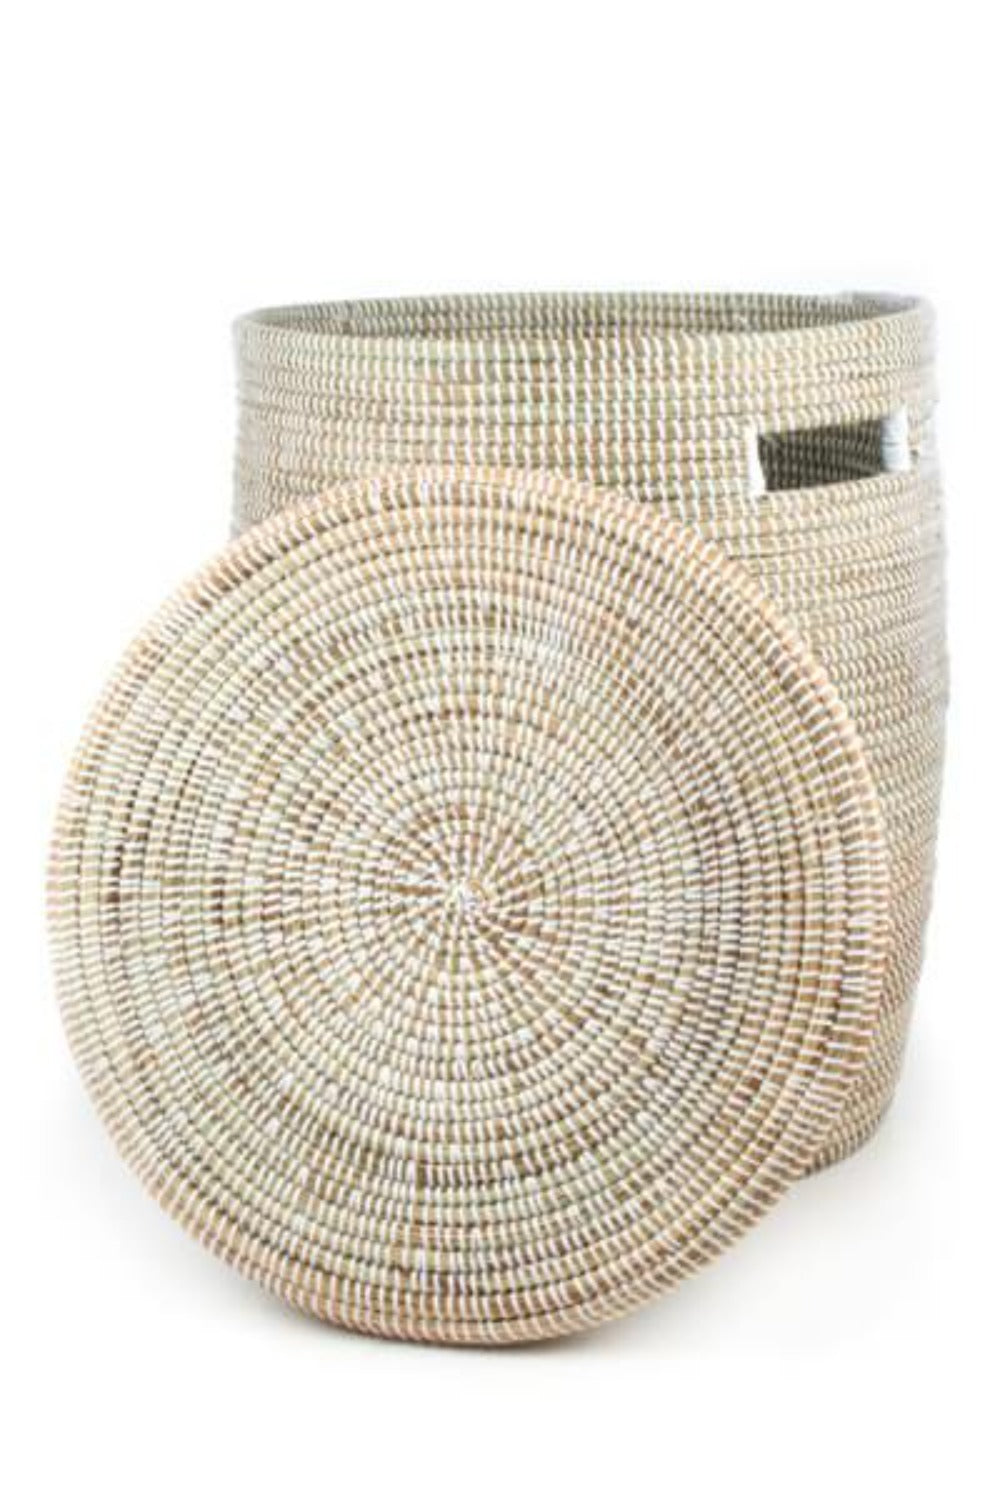 Swahili African Modern Solid White Peace Corps Hamper